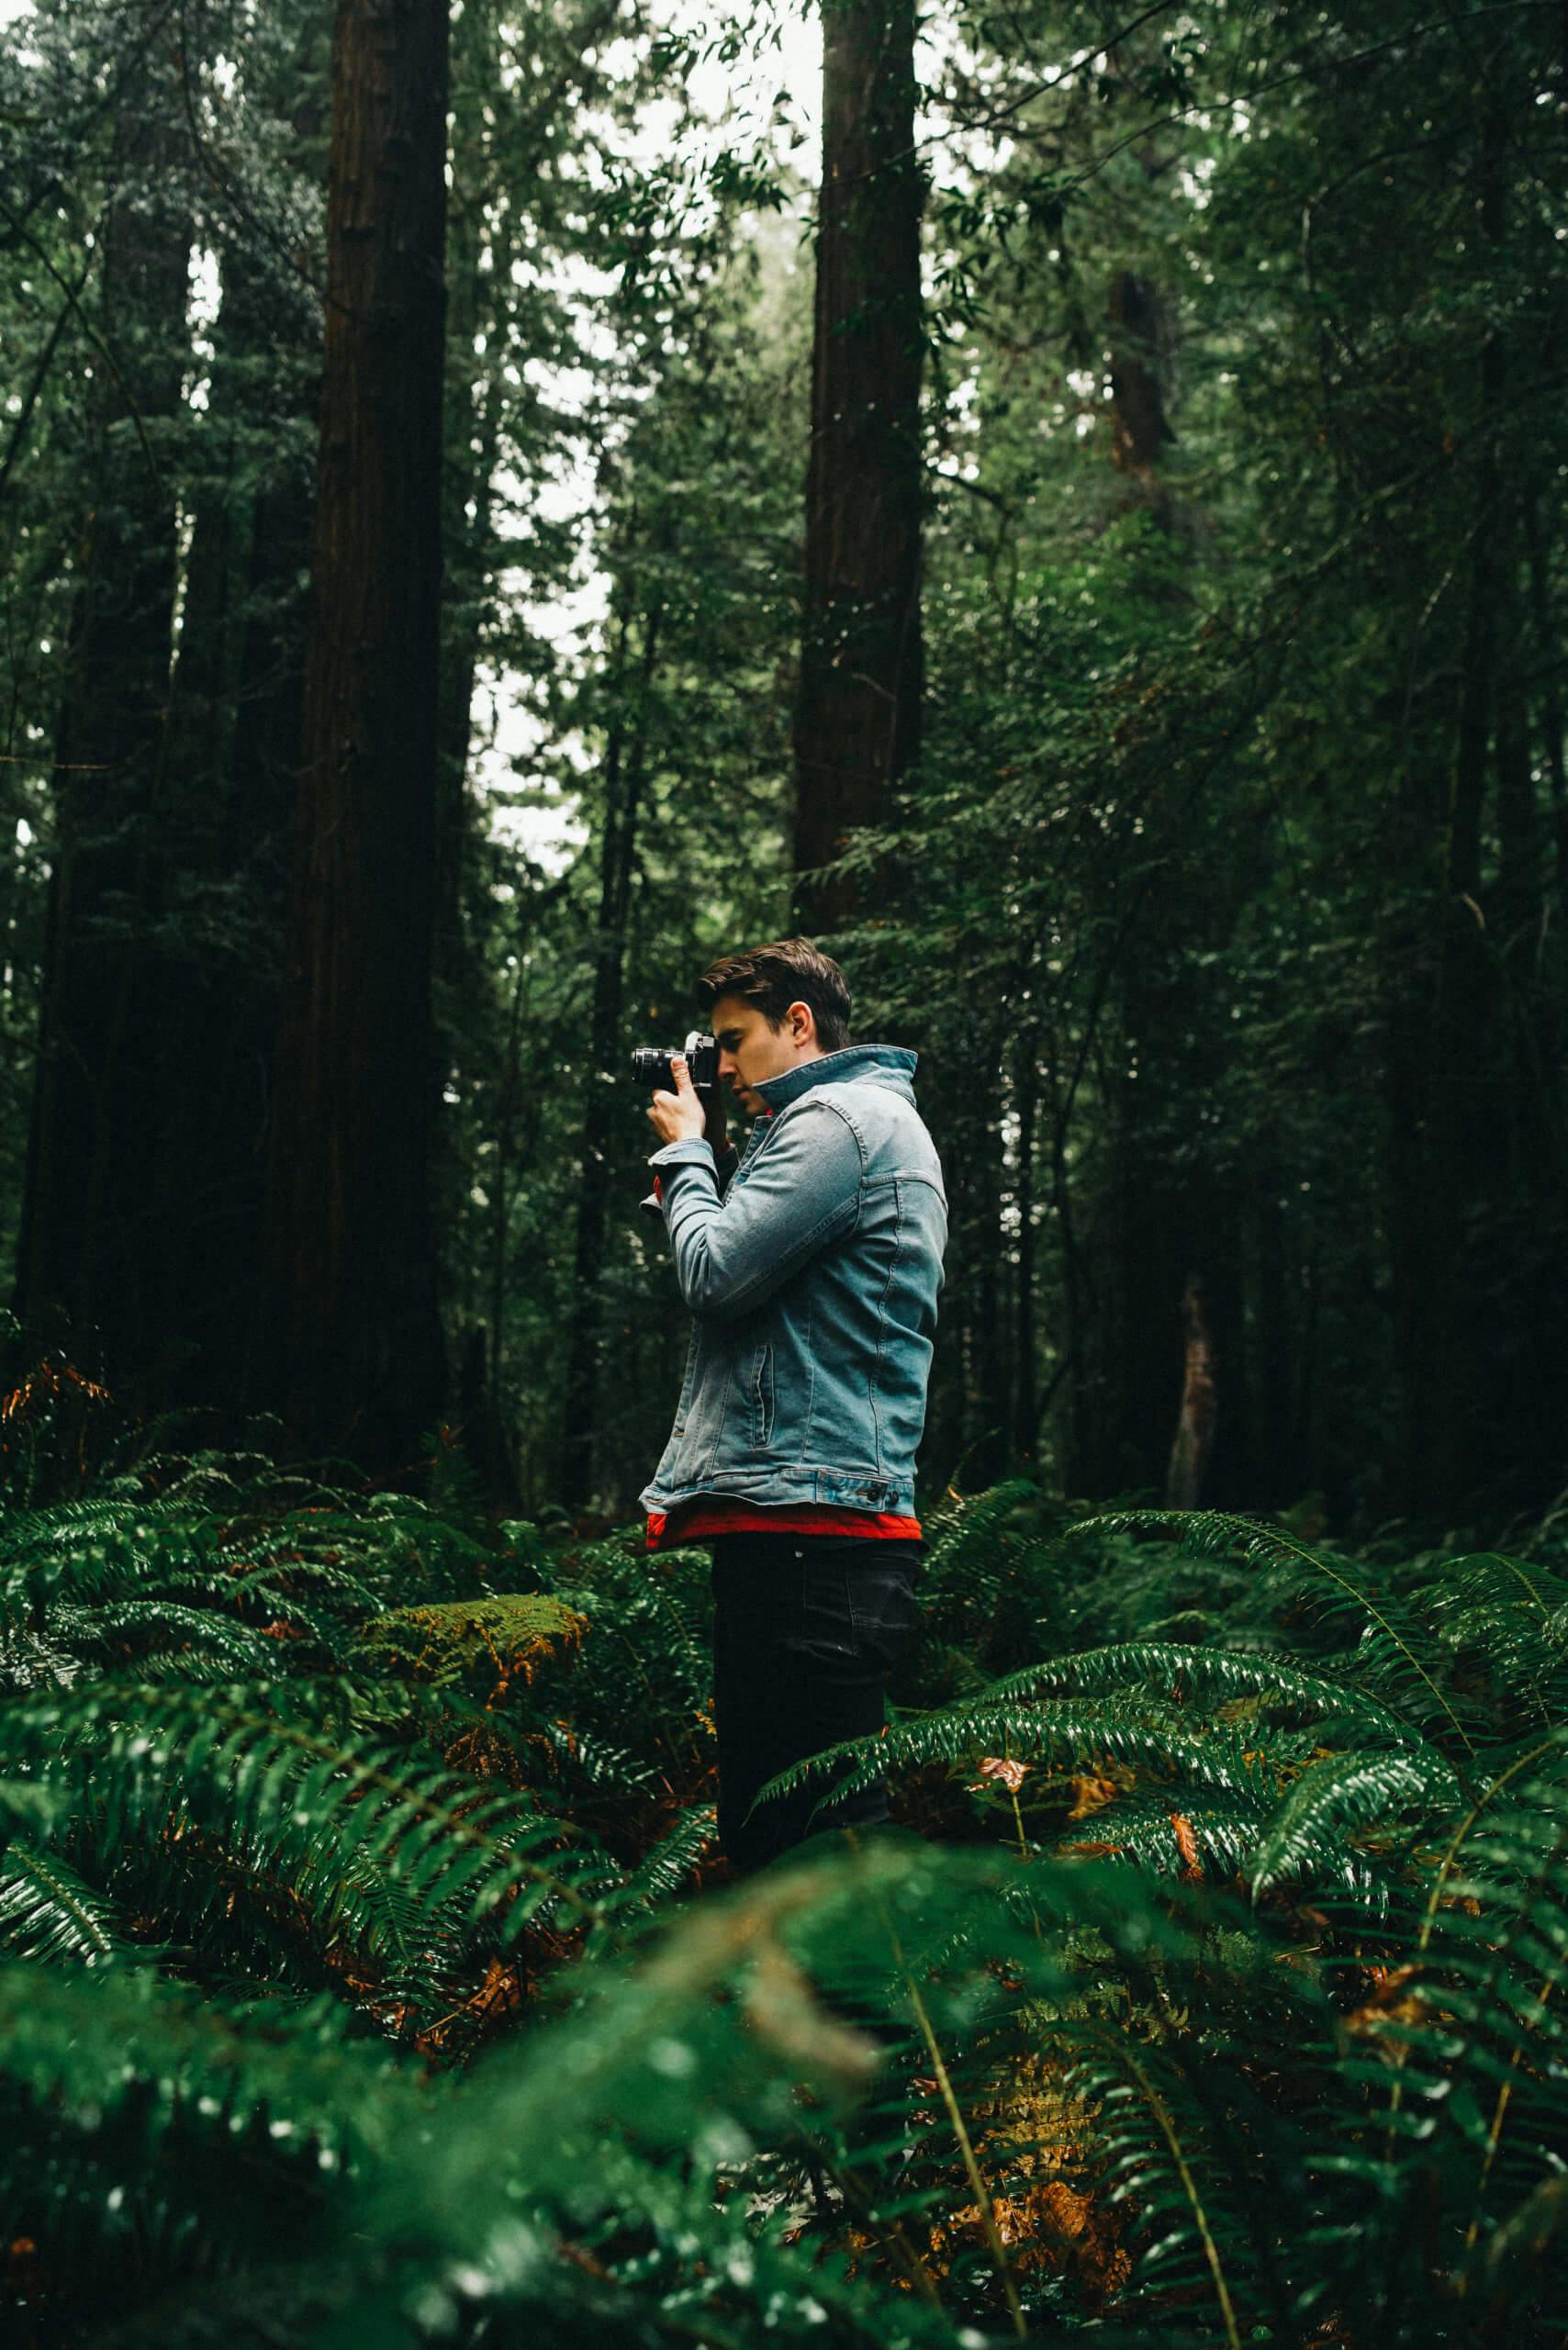 A man photographing the forest with tall trees and lush greenery.